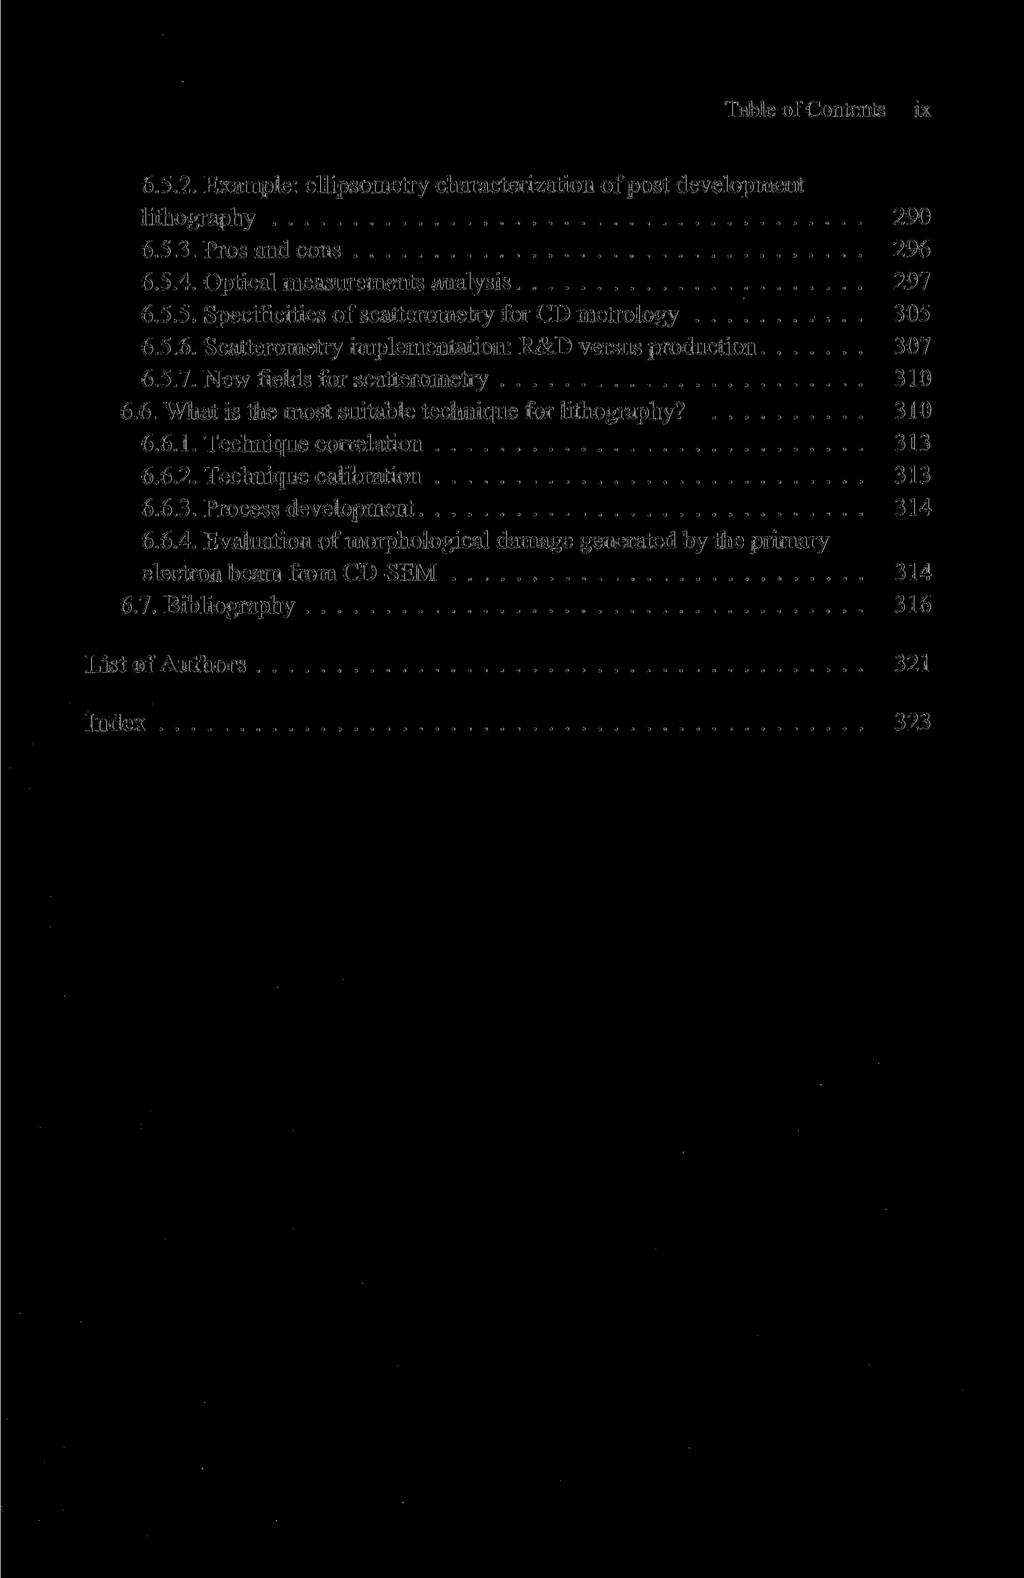 Table of Contents ix 6.5.2. Example: ellipsometry characterization of post development lithography 290 6.5.3. Pros and cons 296 6.5.4. Optical measurements analysis 297 6.5.5. Specificities of scatterometry for CD metrology 305 6.